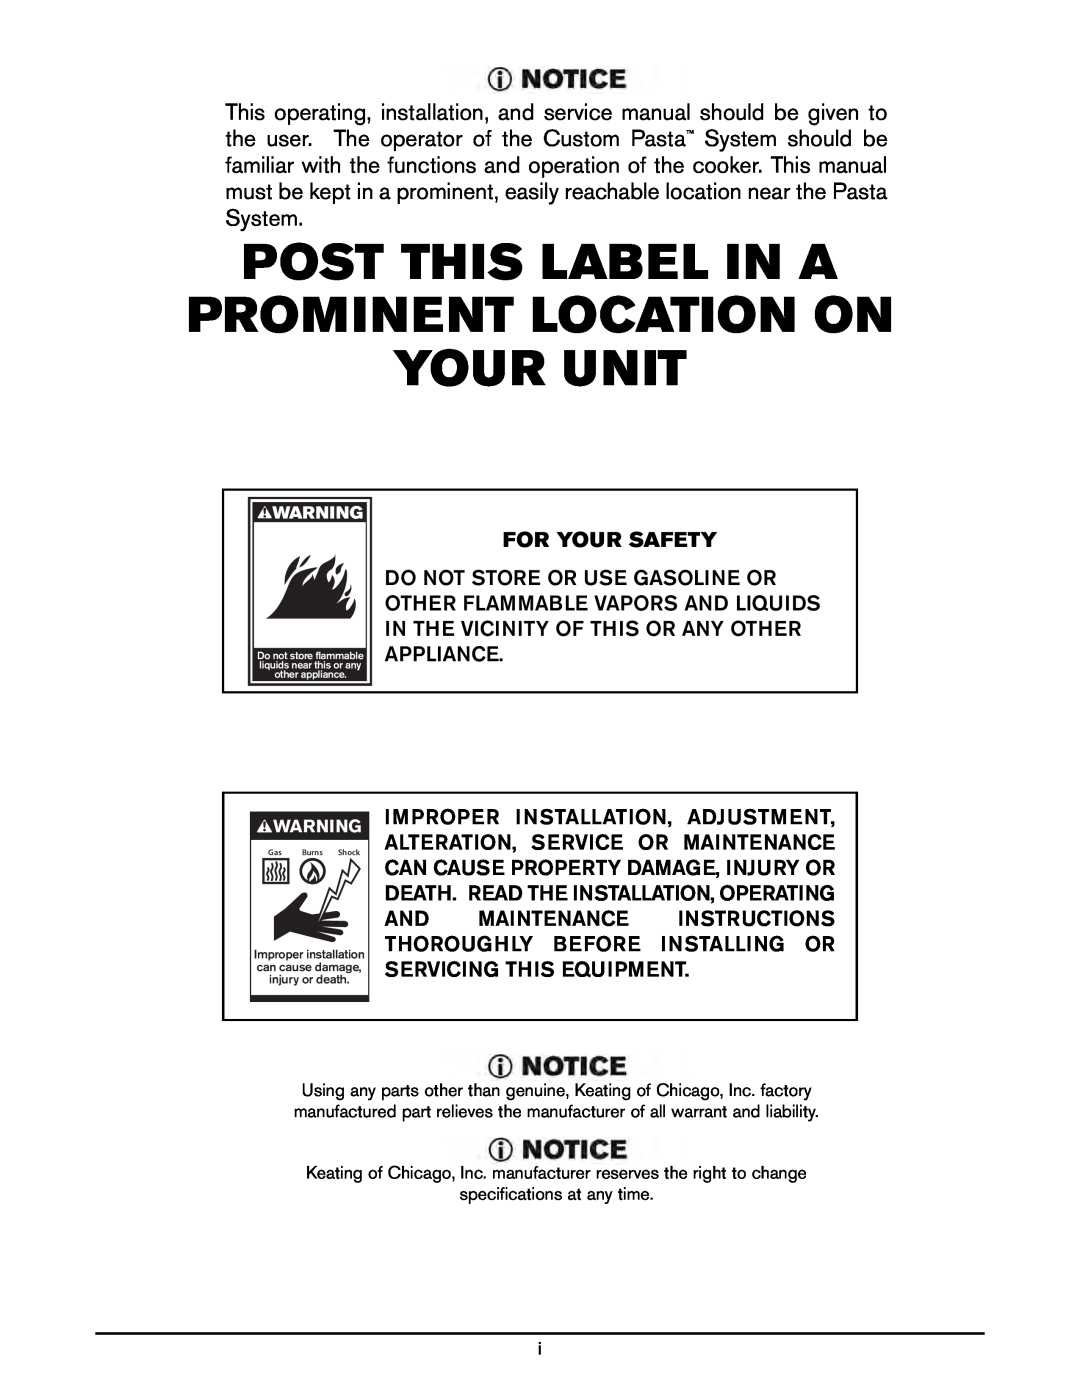 Keating Of Chicago 2009 manual For Your Safety, Post This Label In A Prominent Location On Your Unit 